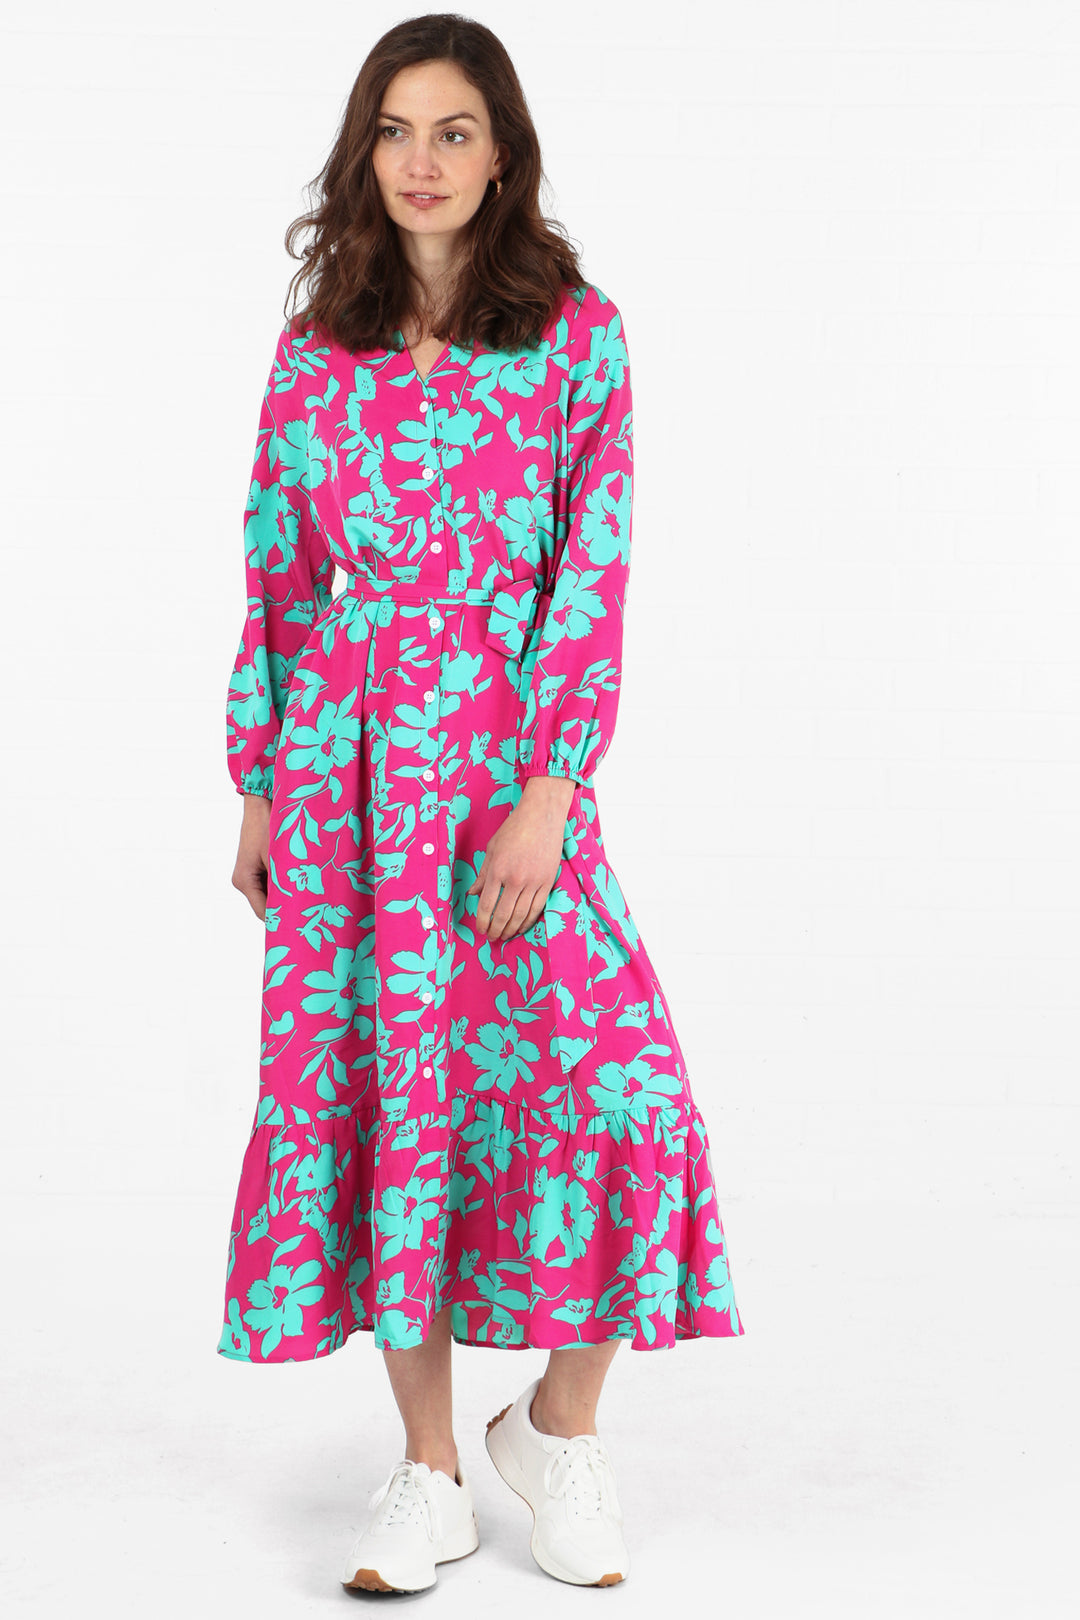 model wearing a maxi tiered shirt dress in a pink and turquoise tropical floral print pattern